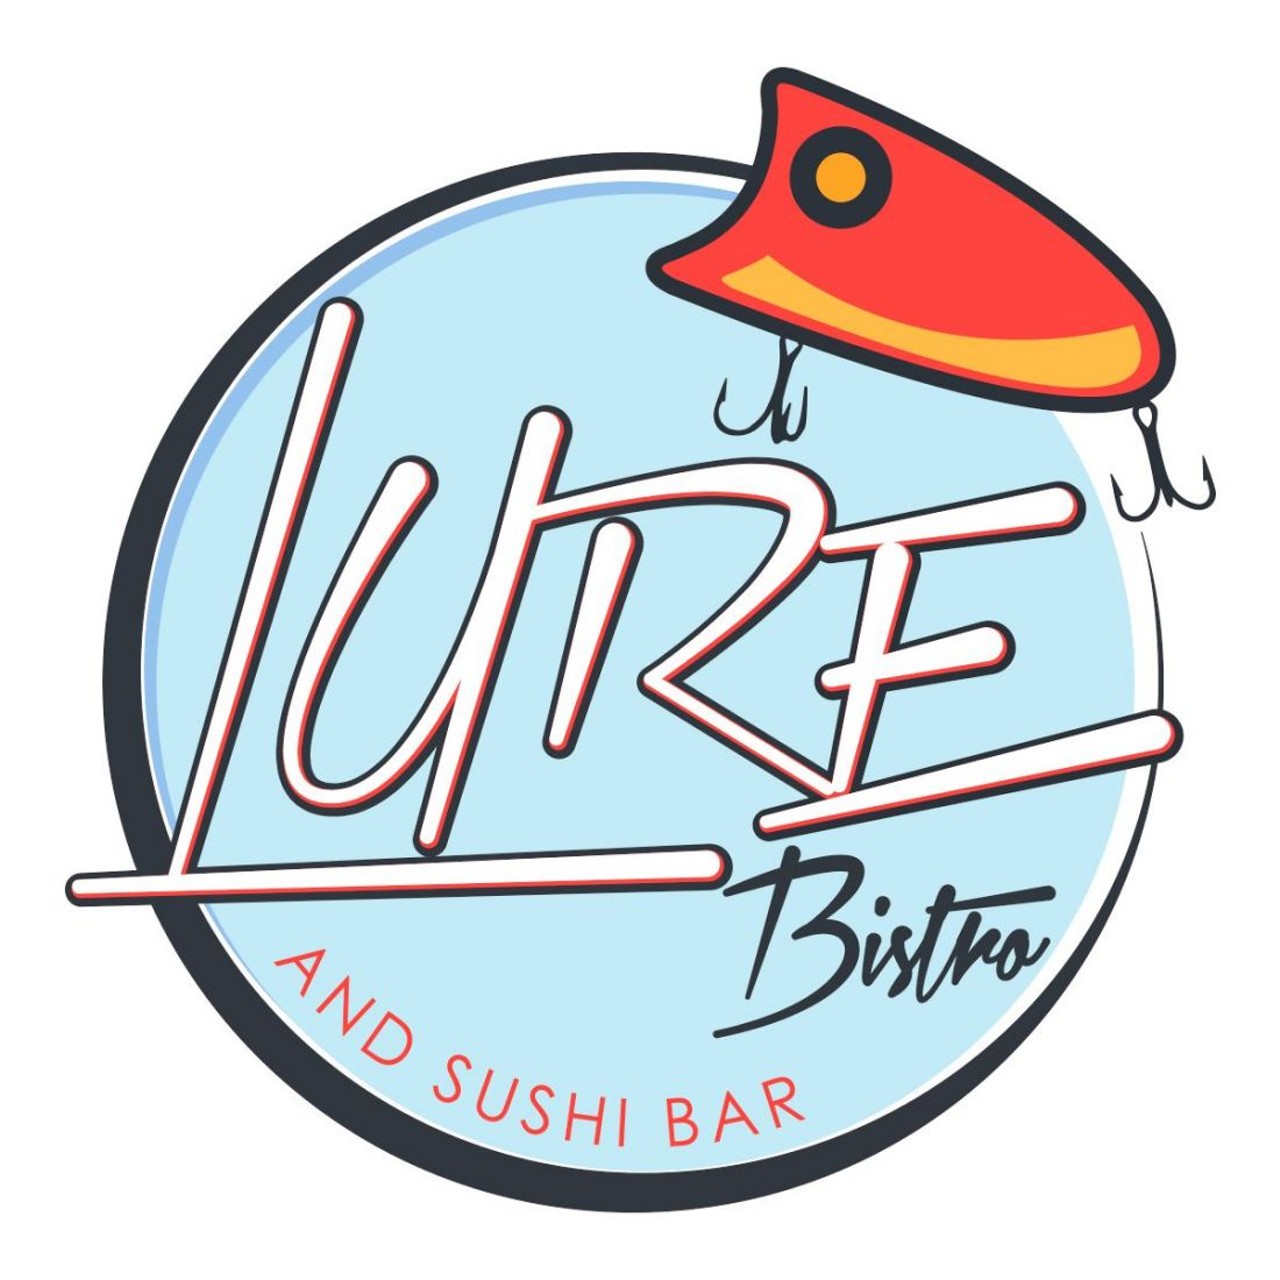  Lure Bistro
38040 Third St., Willoughby
Photo via Scene Archives